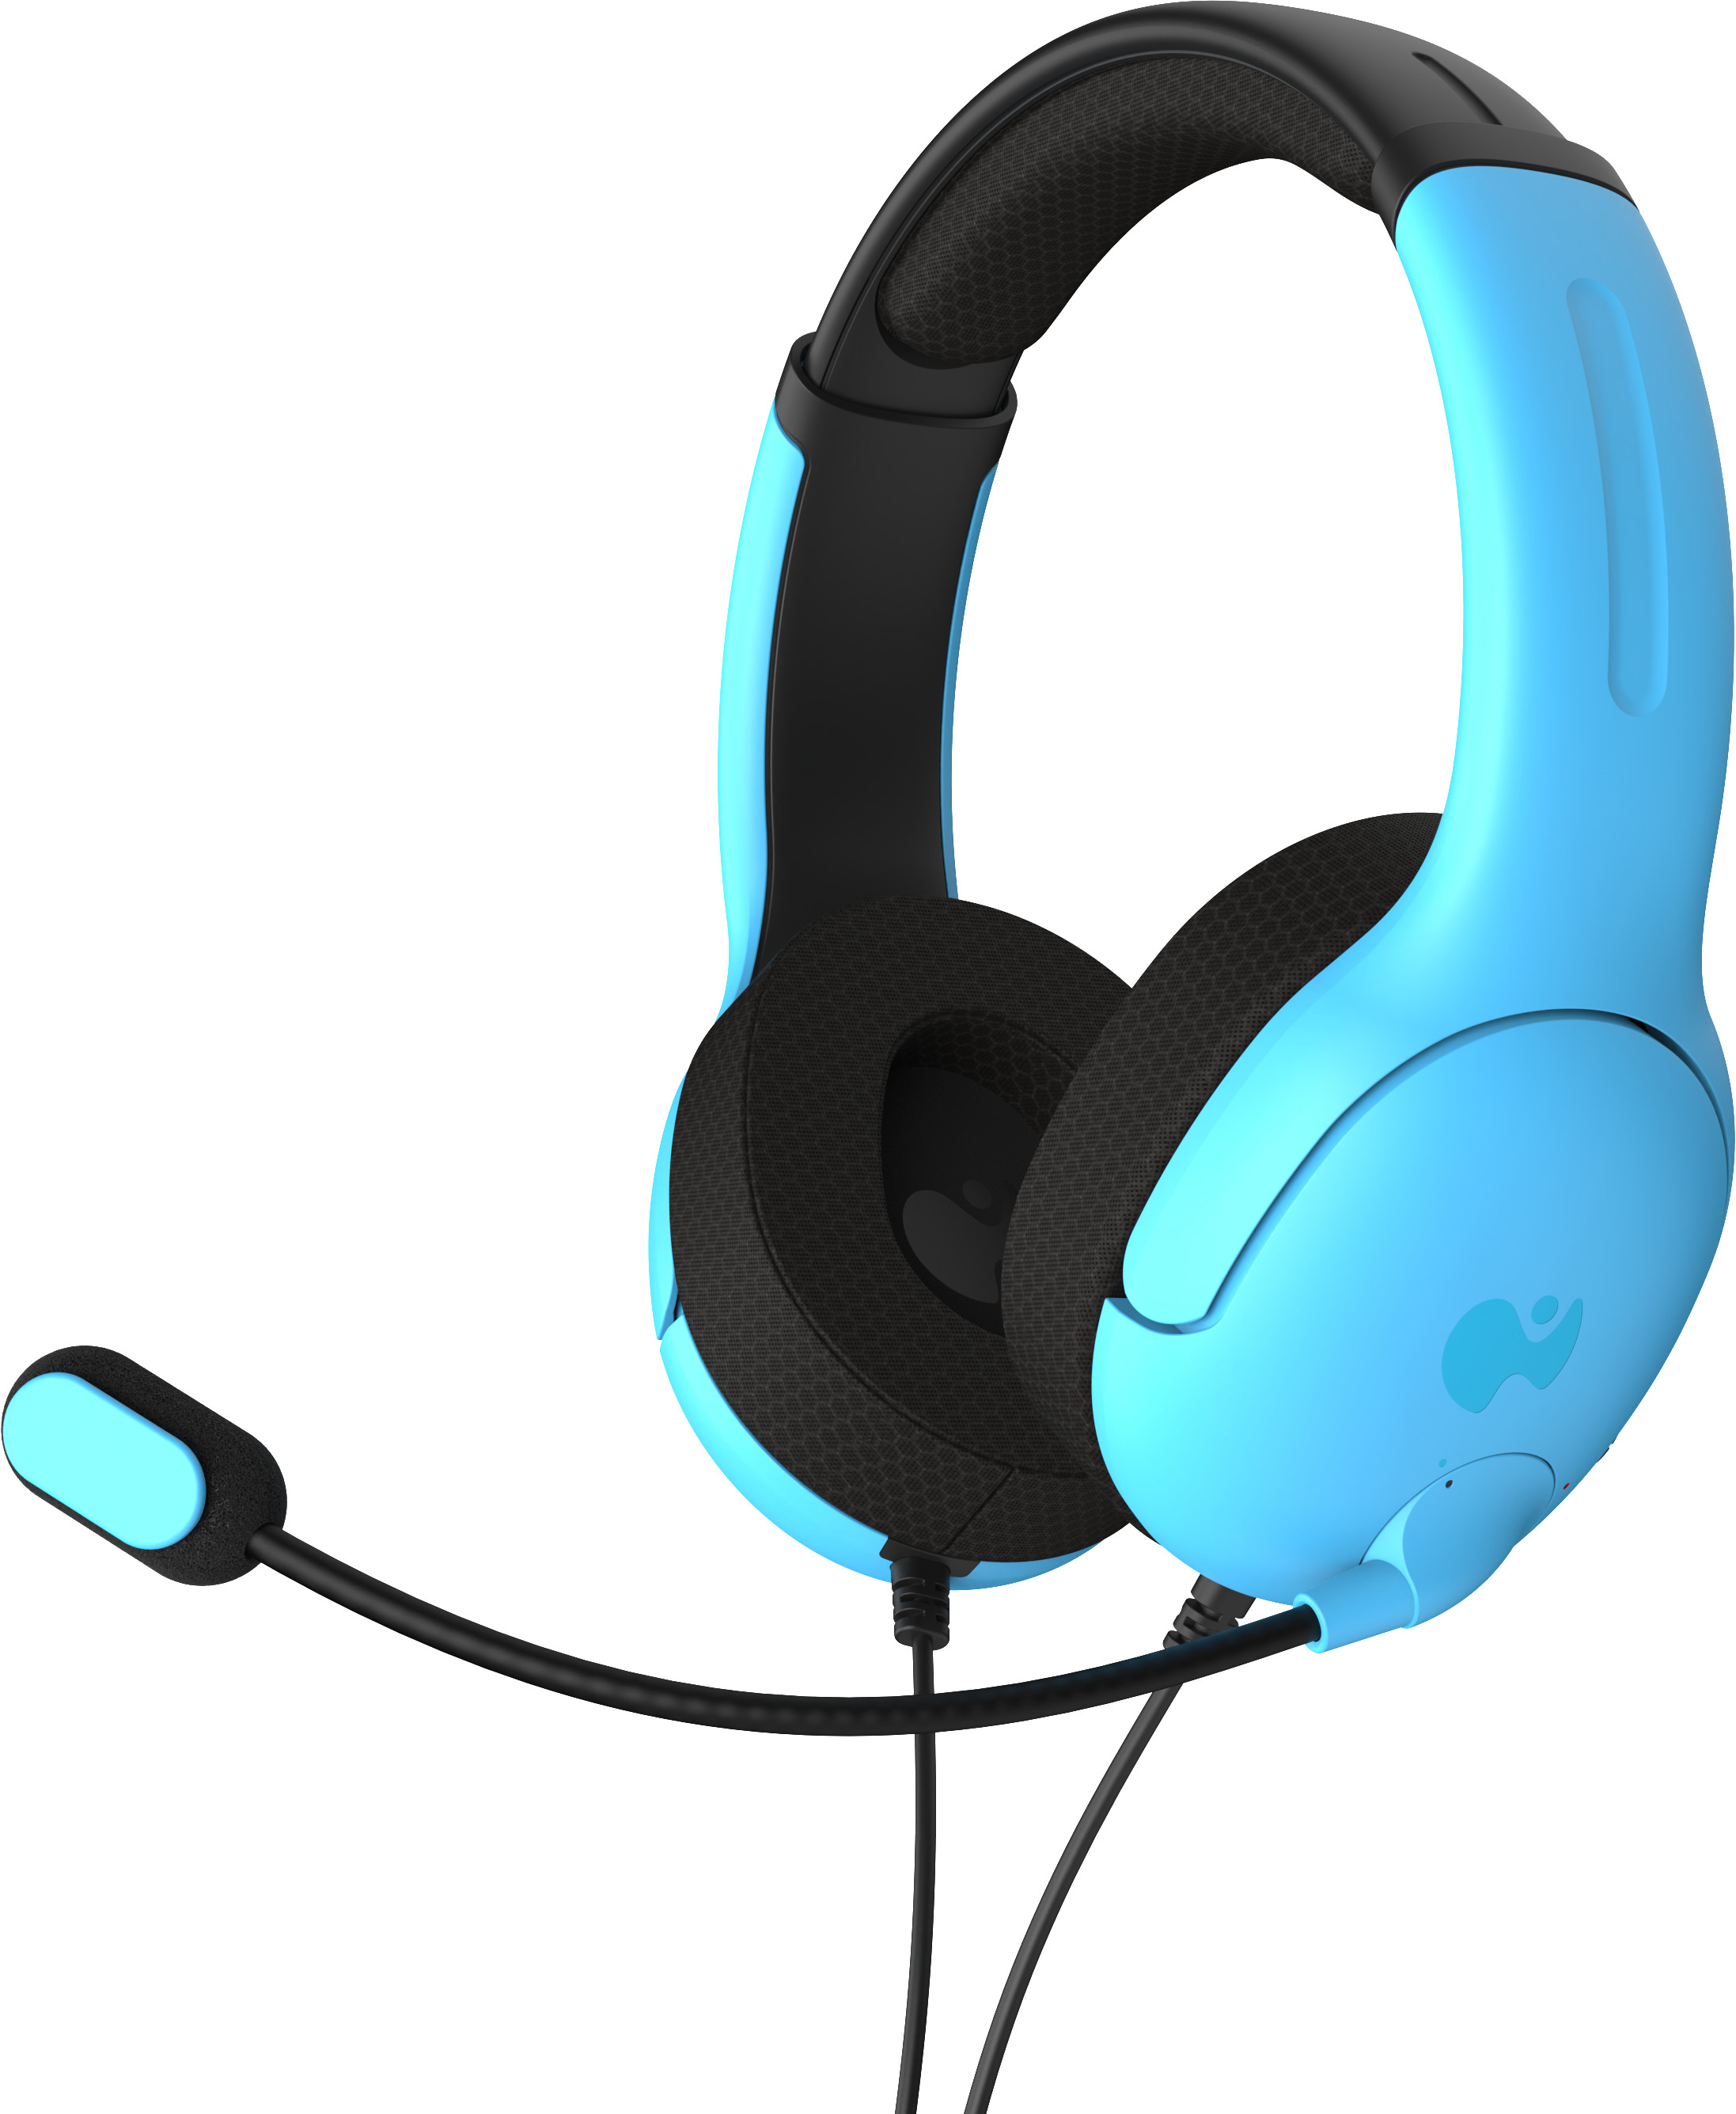 PDP Airlite Wired Stereo Headset 052-011-BL PS5, Neptune Blue